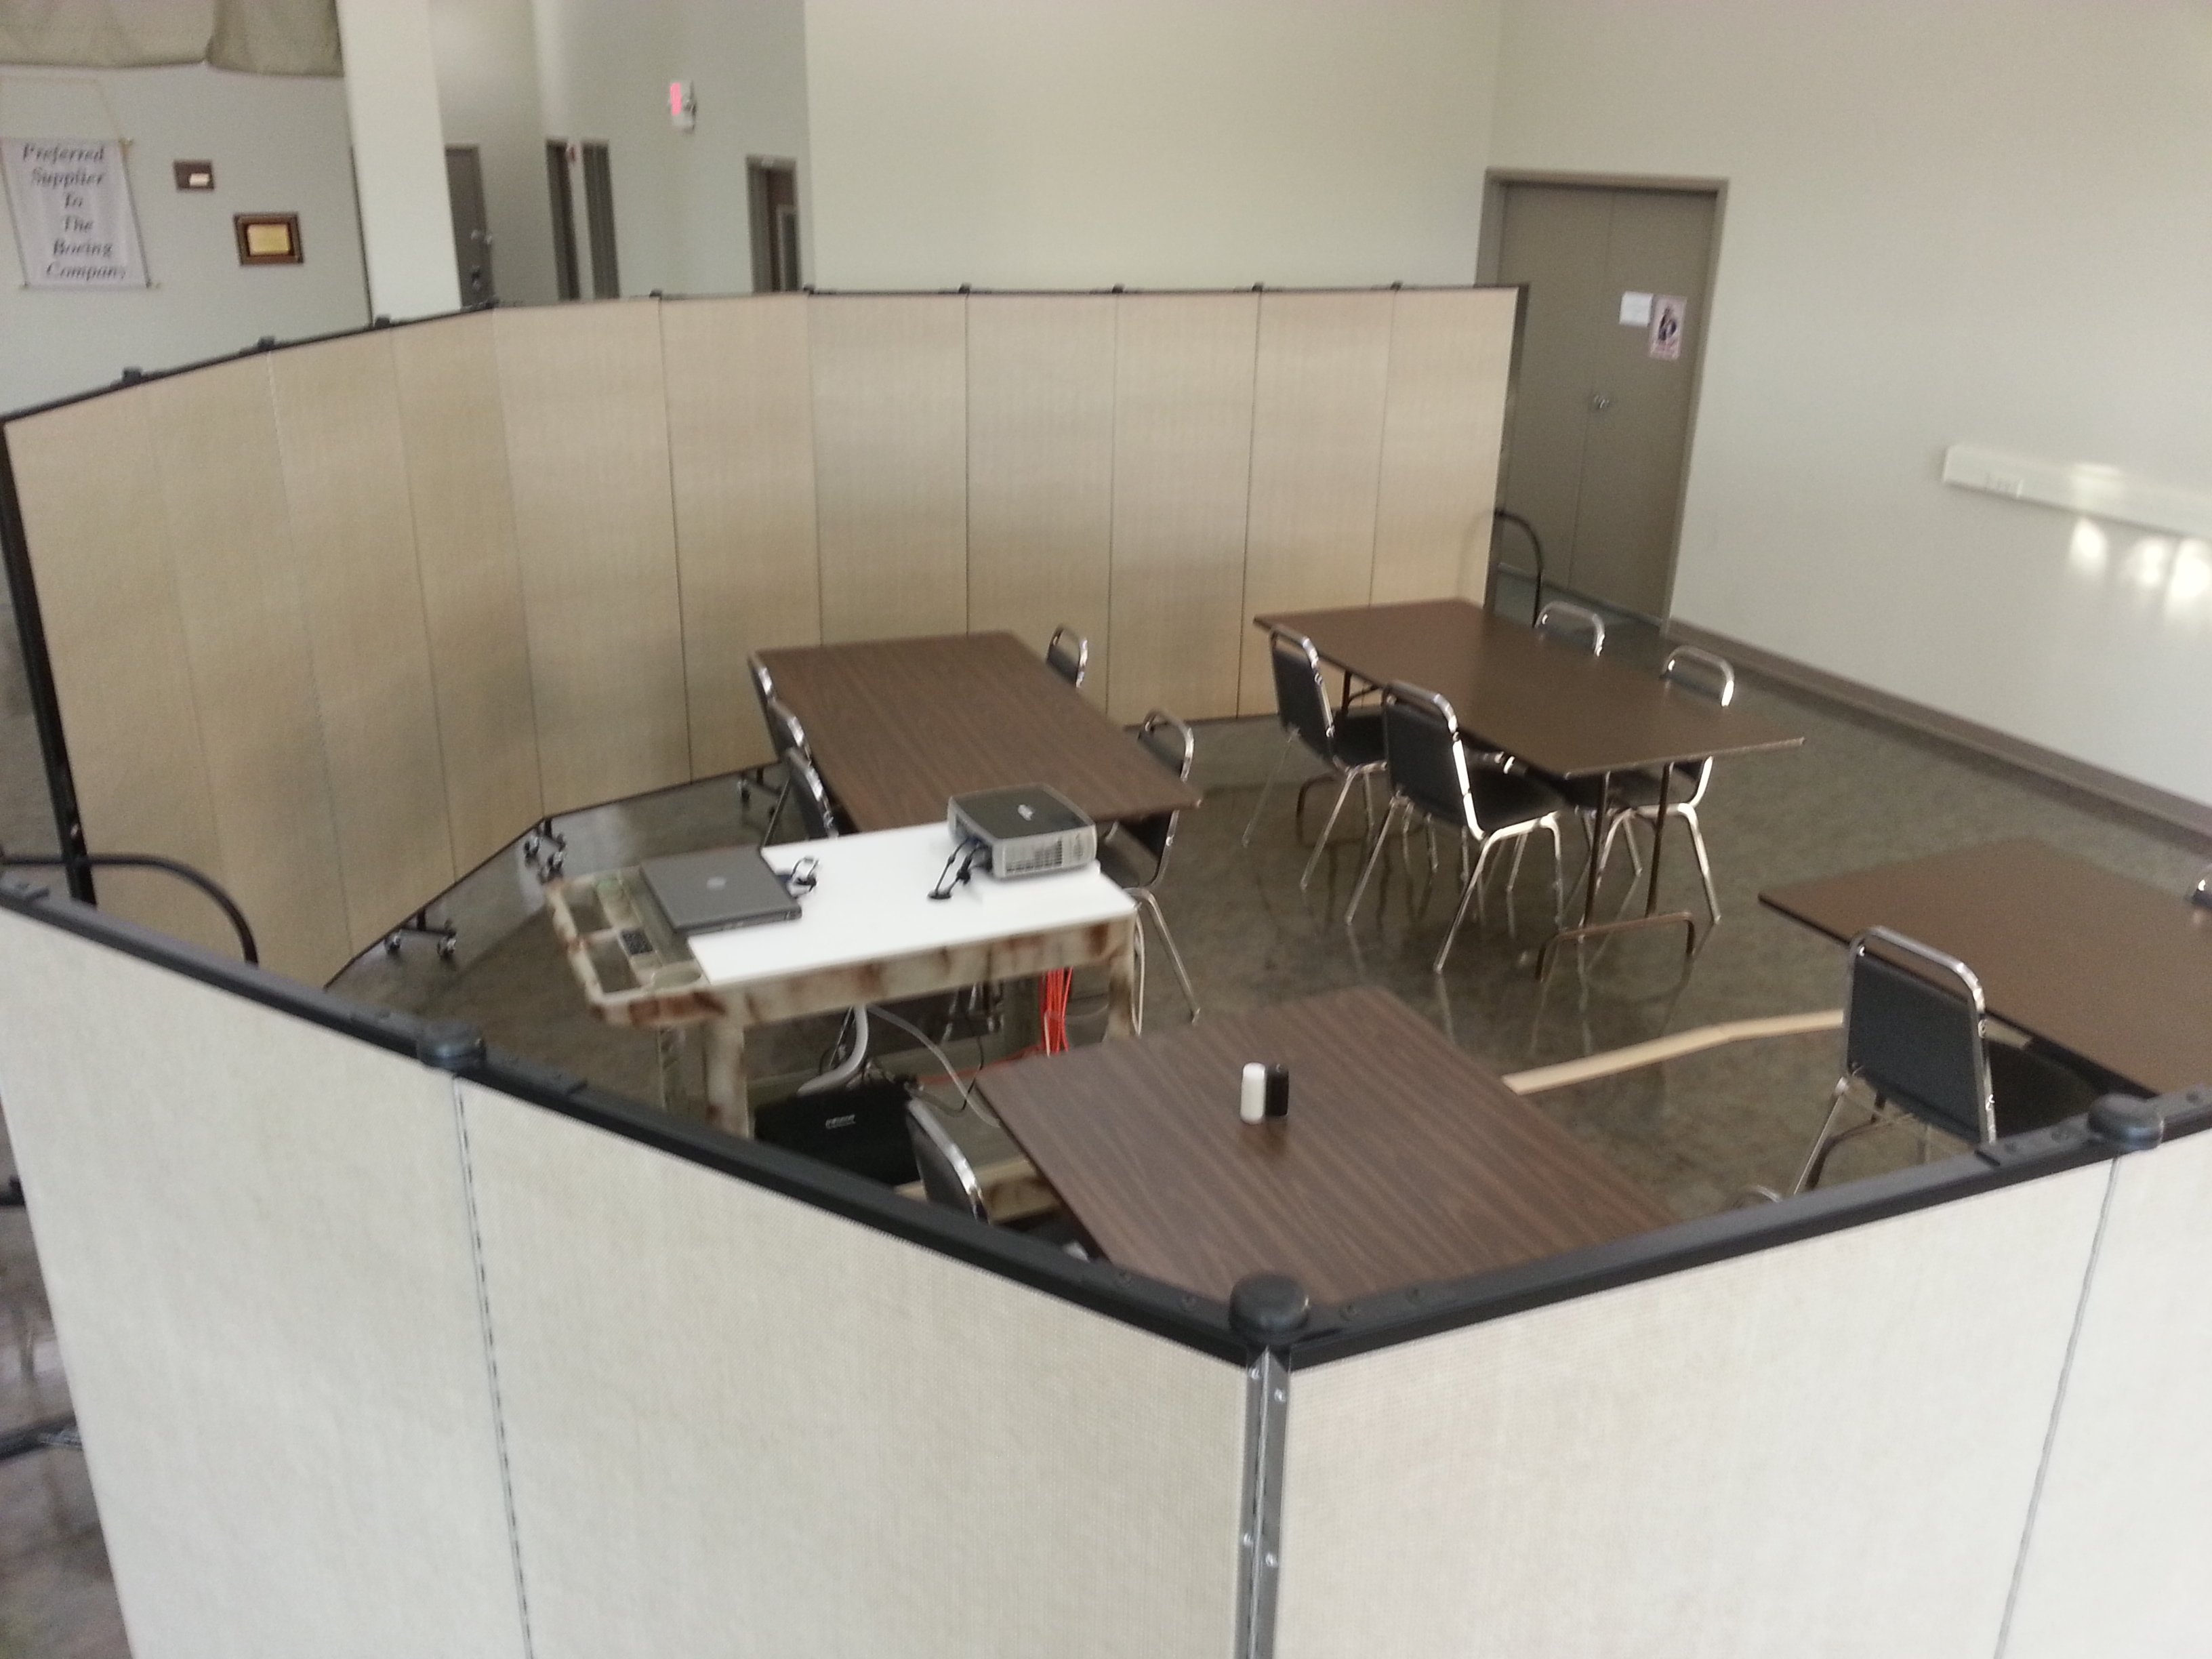 Screenflex Room Dividers are arranged around a group of 4 tables and a projector to create a conference room within a large open meeting area.